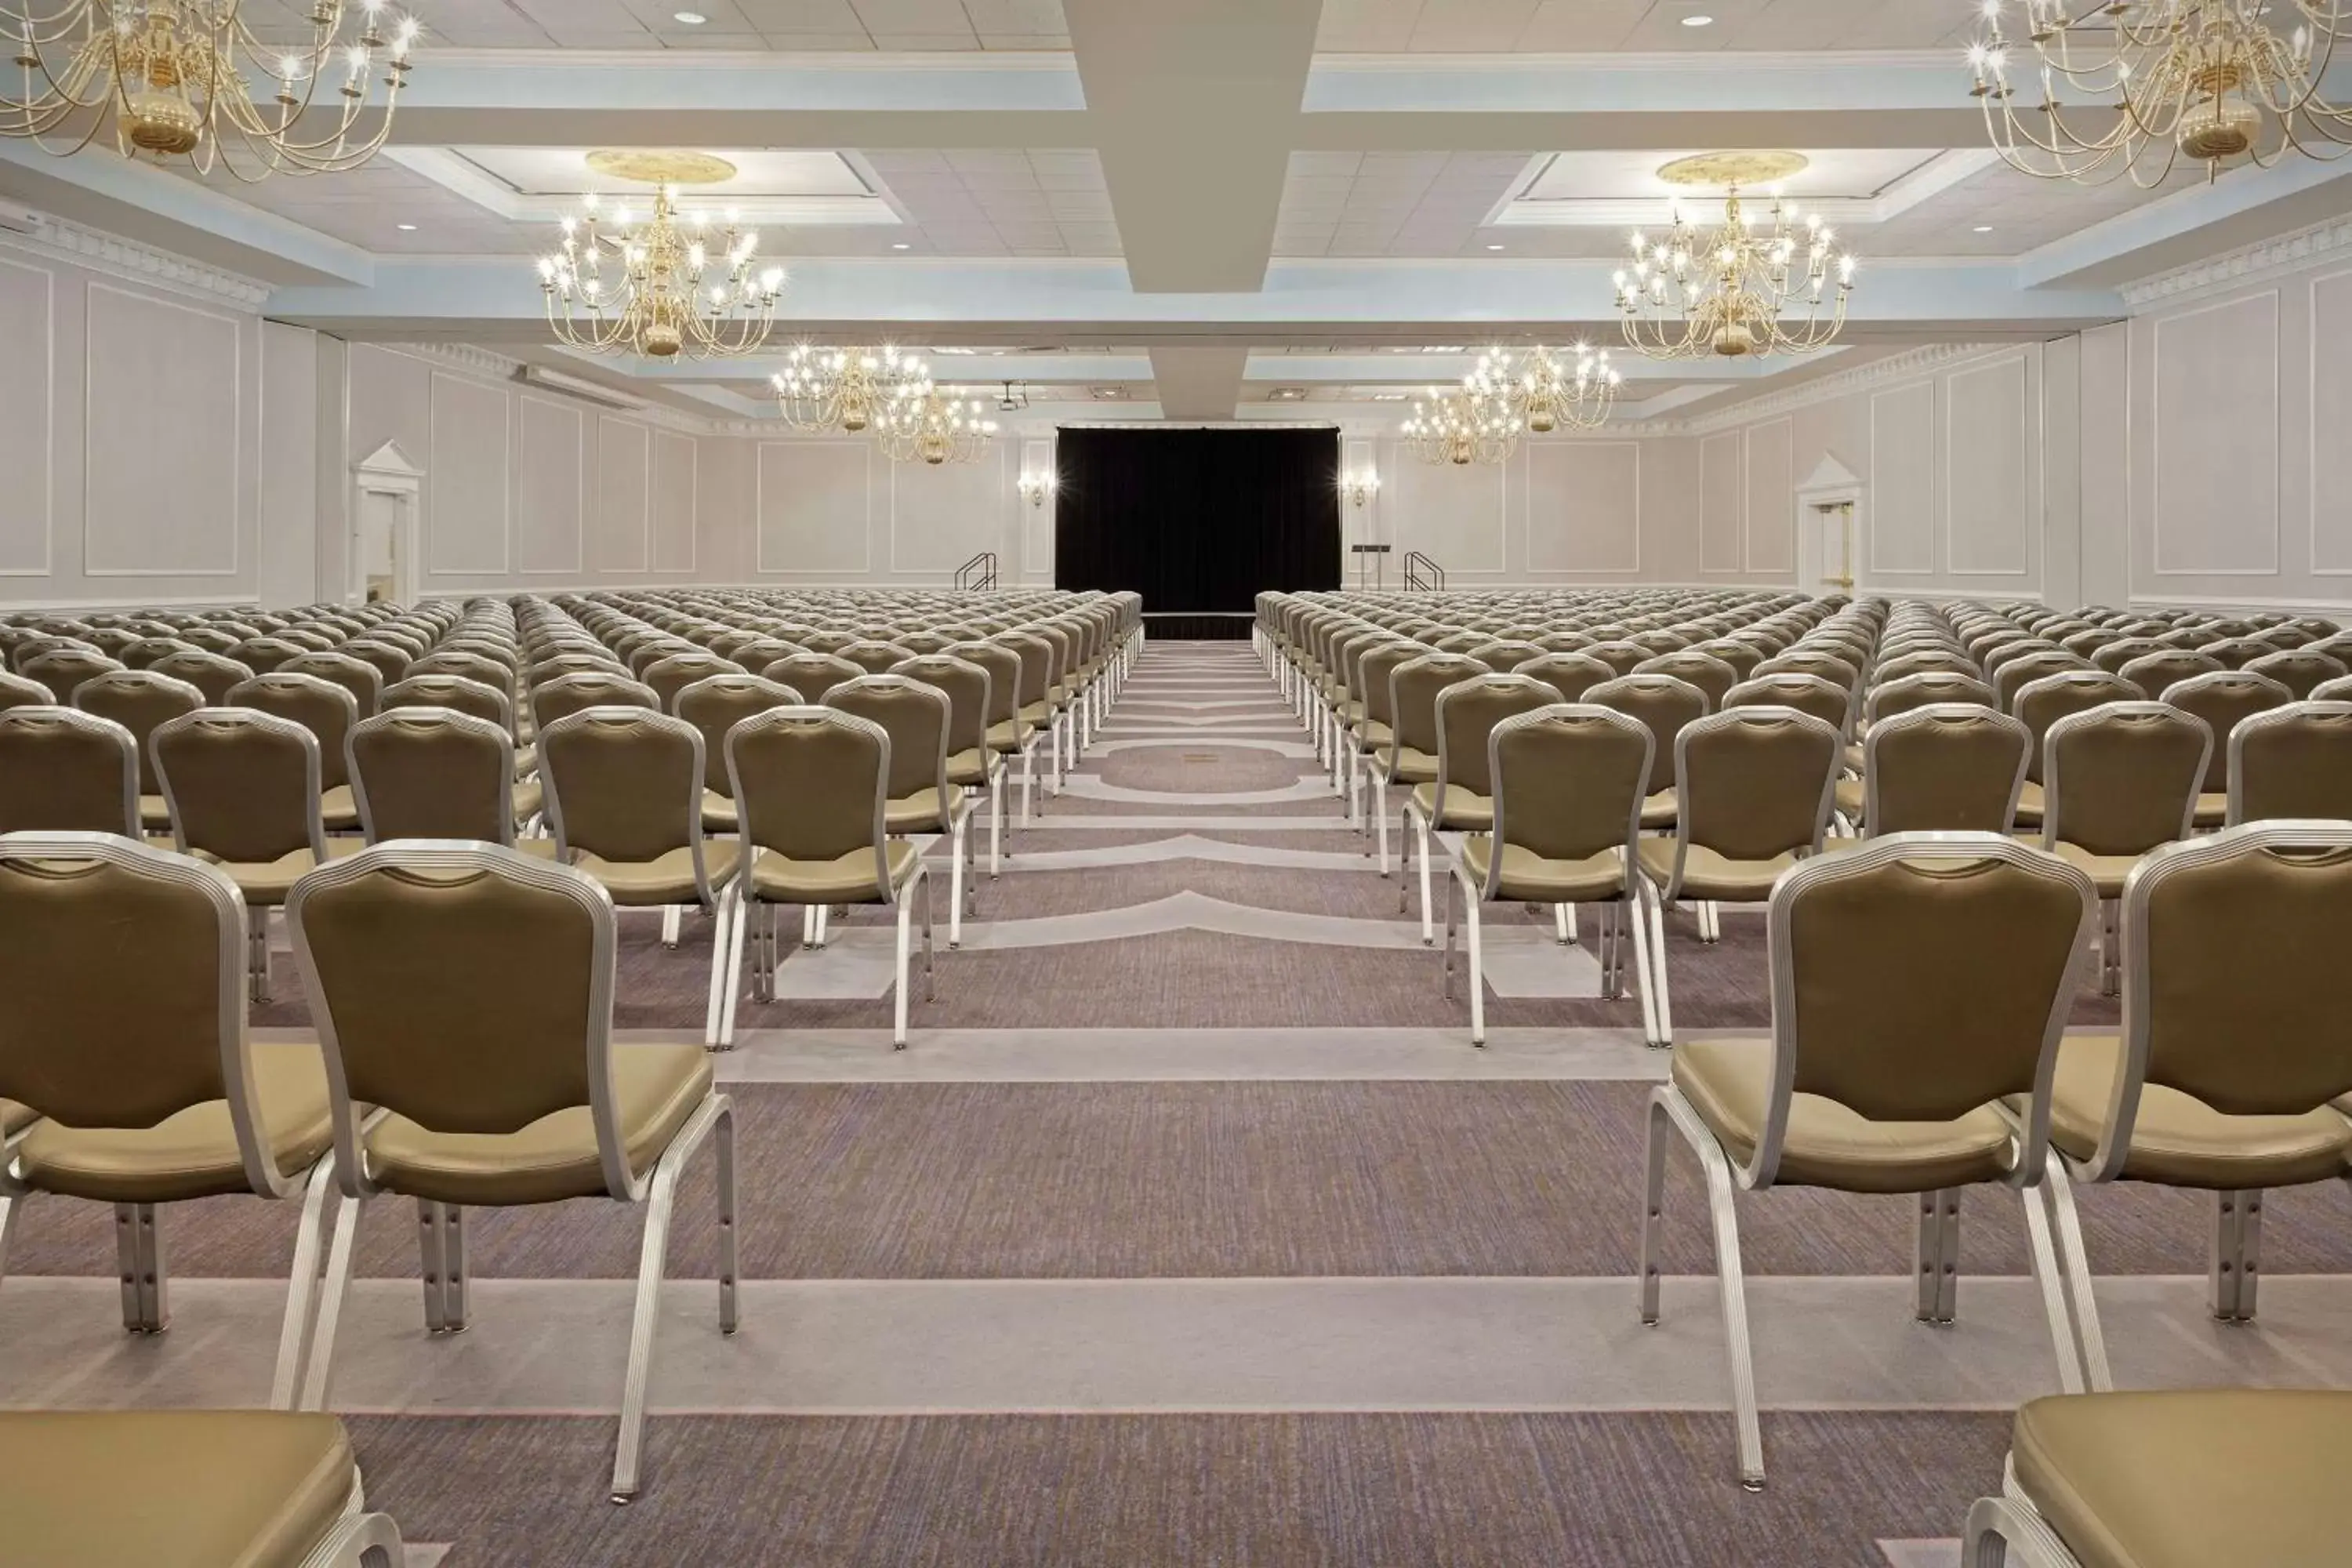 Meeting/conference room in Hilton Jackson